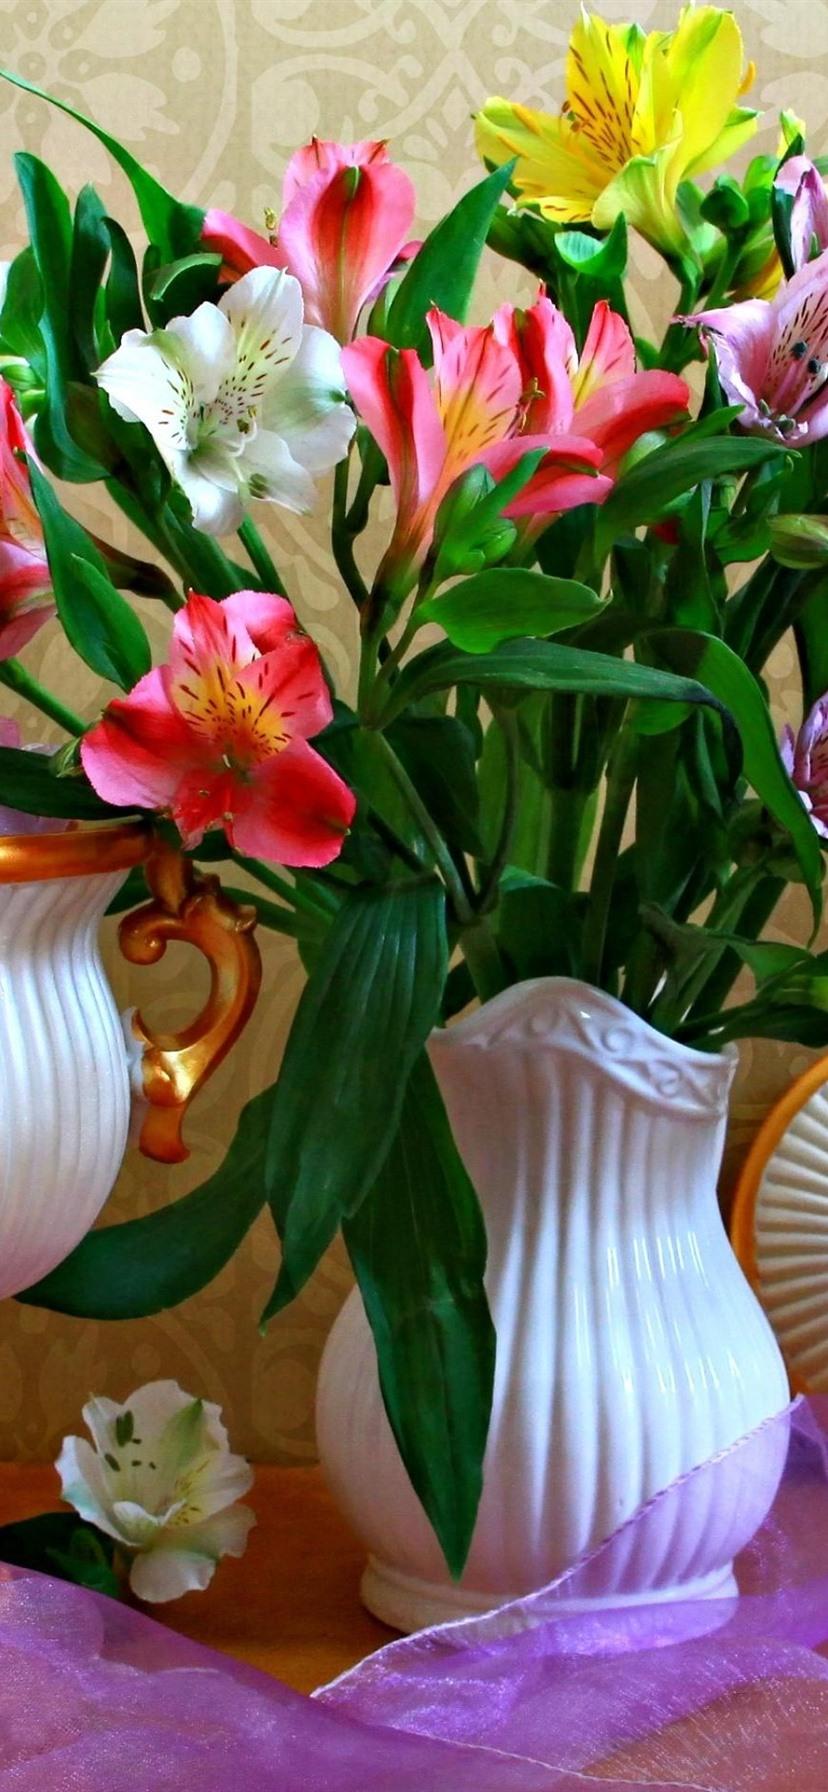 Pink and white lilies, vase, flowers 828x1792 iPhone XR wallpaper